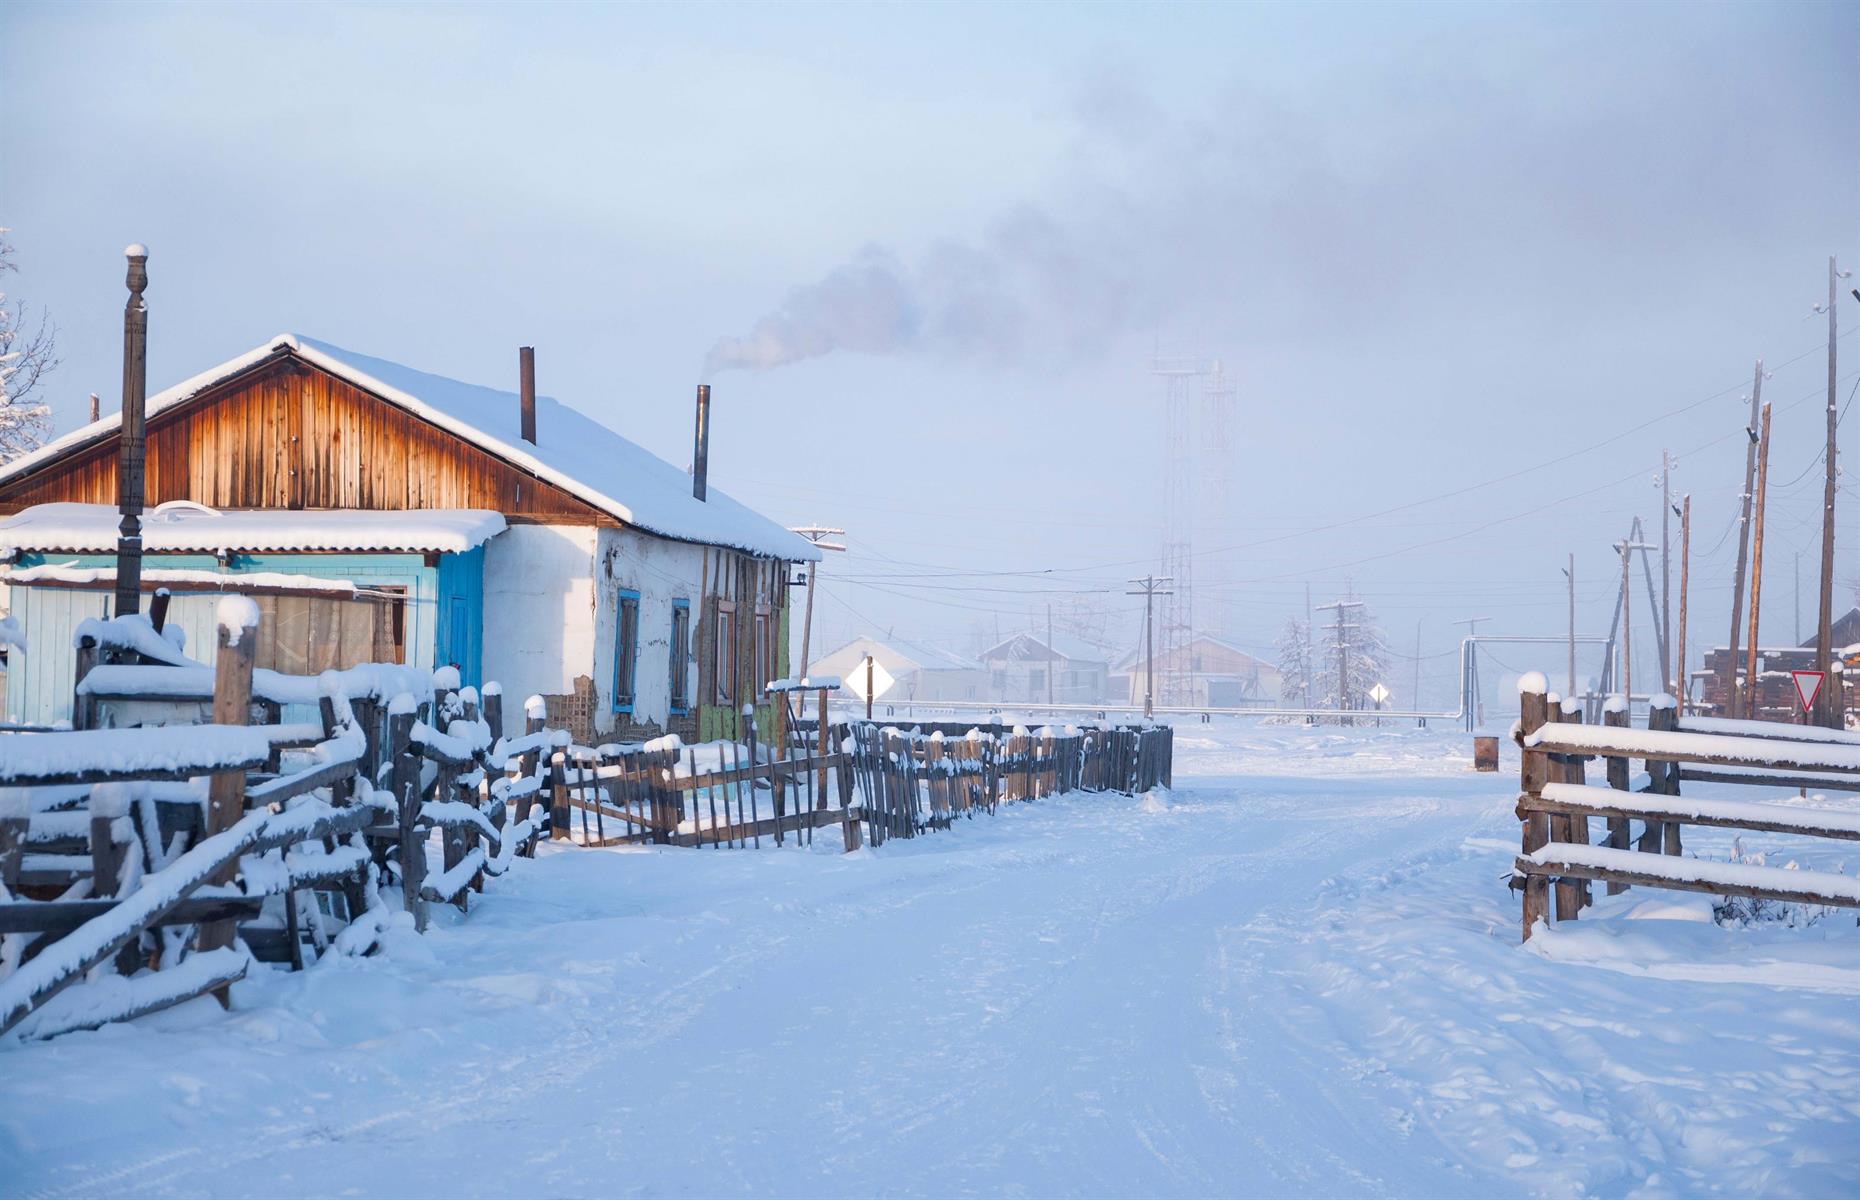 The nearest city is Yakutsk which is 576 miles away. The constant layer of permafrost makes life hard for the locals and prevents farming as nothing can penetrate the hard ground. The frozen ground also stops the town from having running water, so toilets are outhouses.